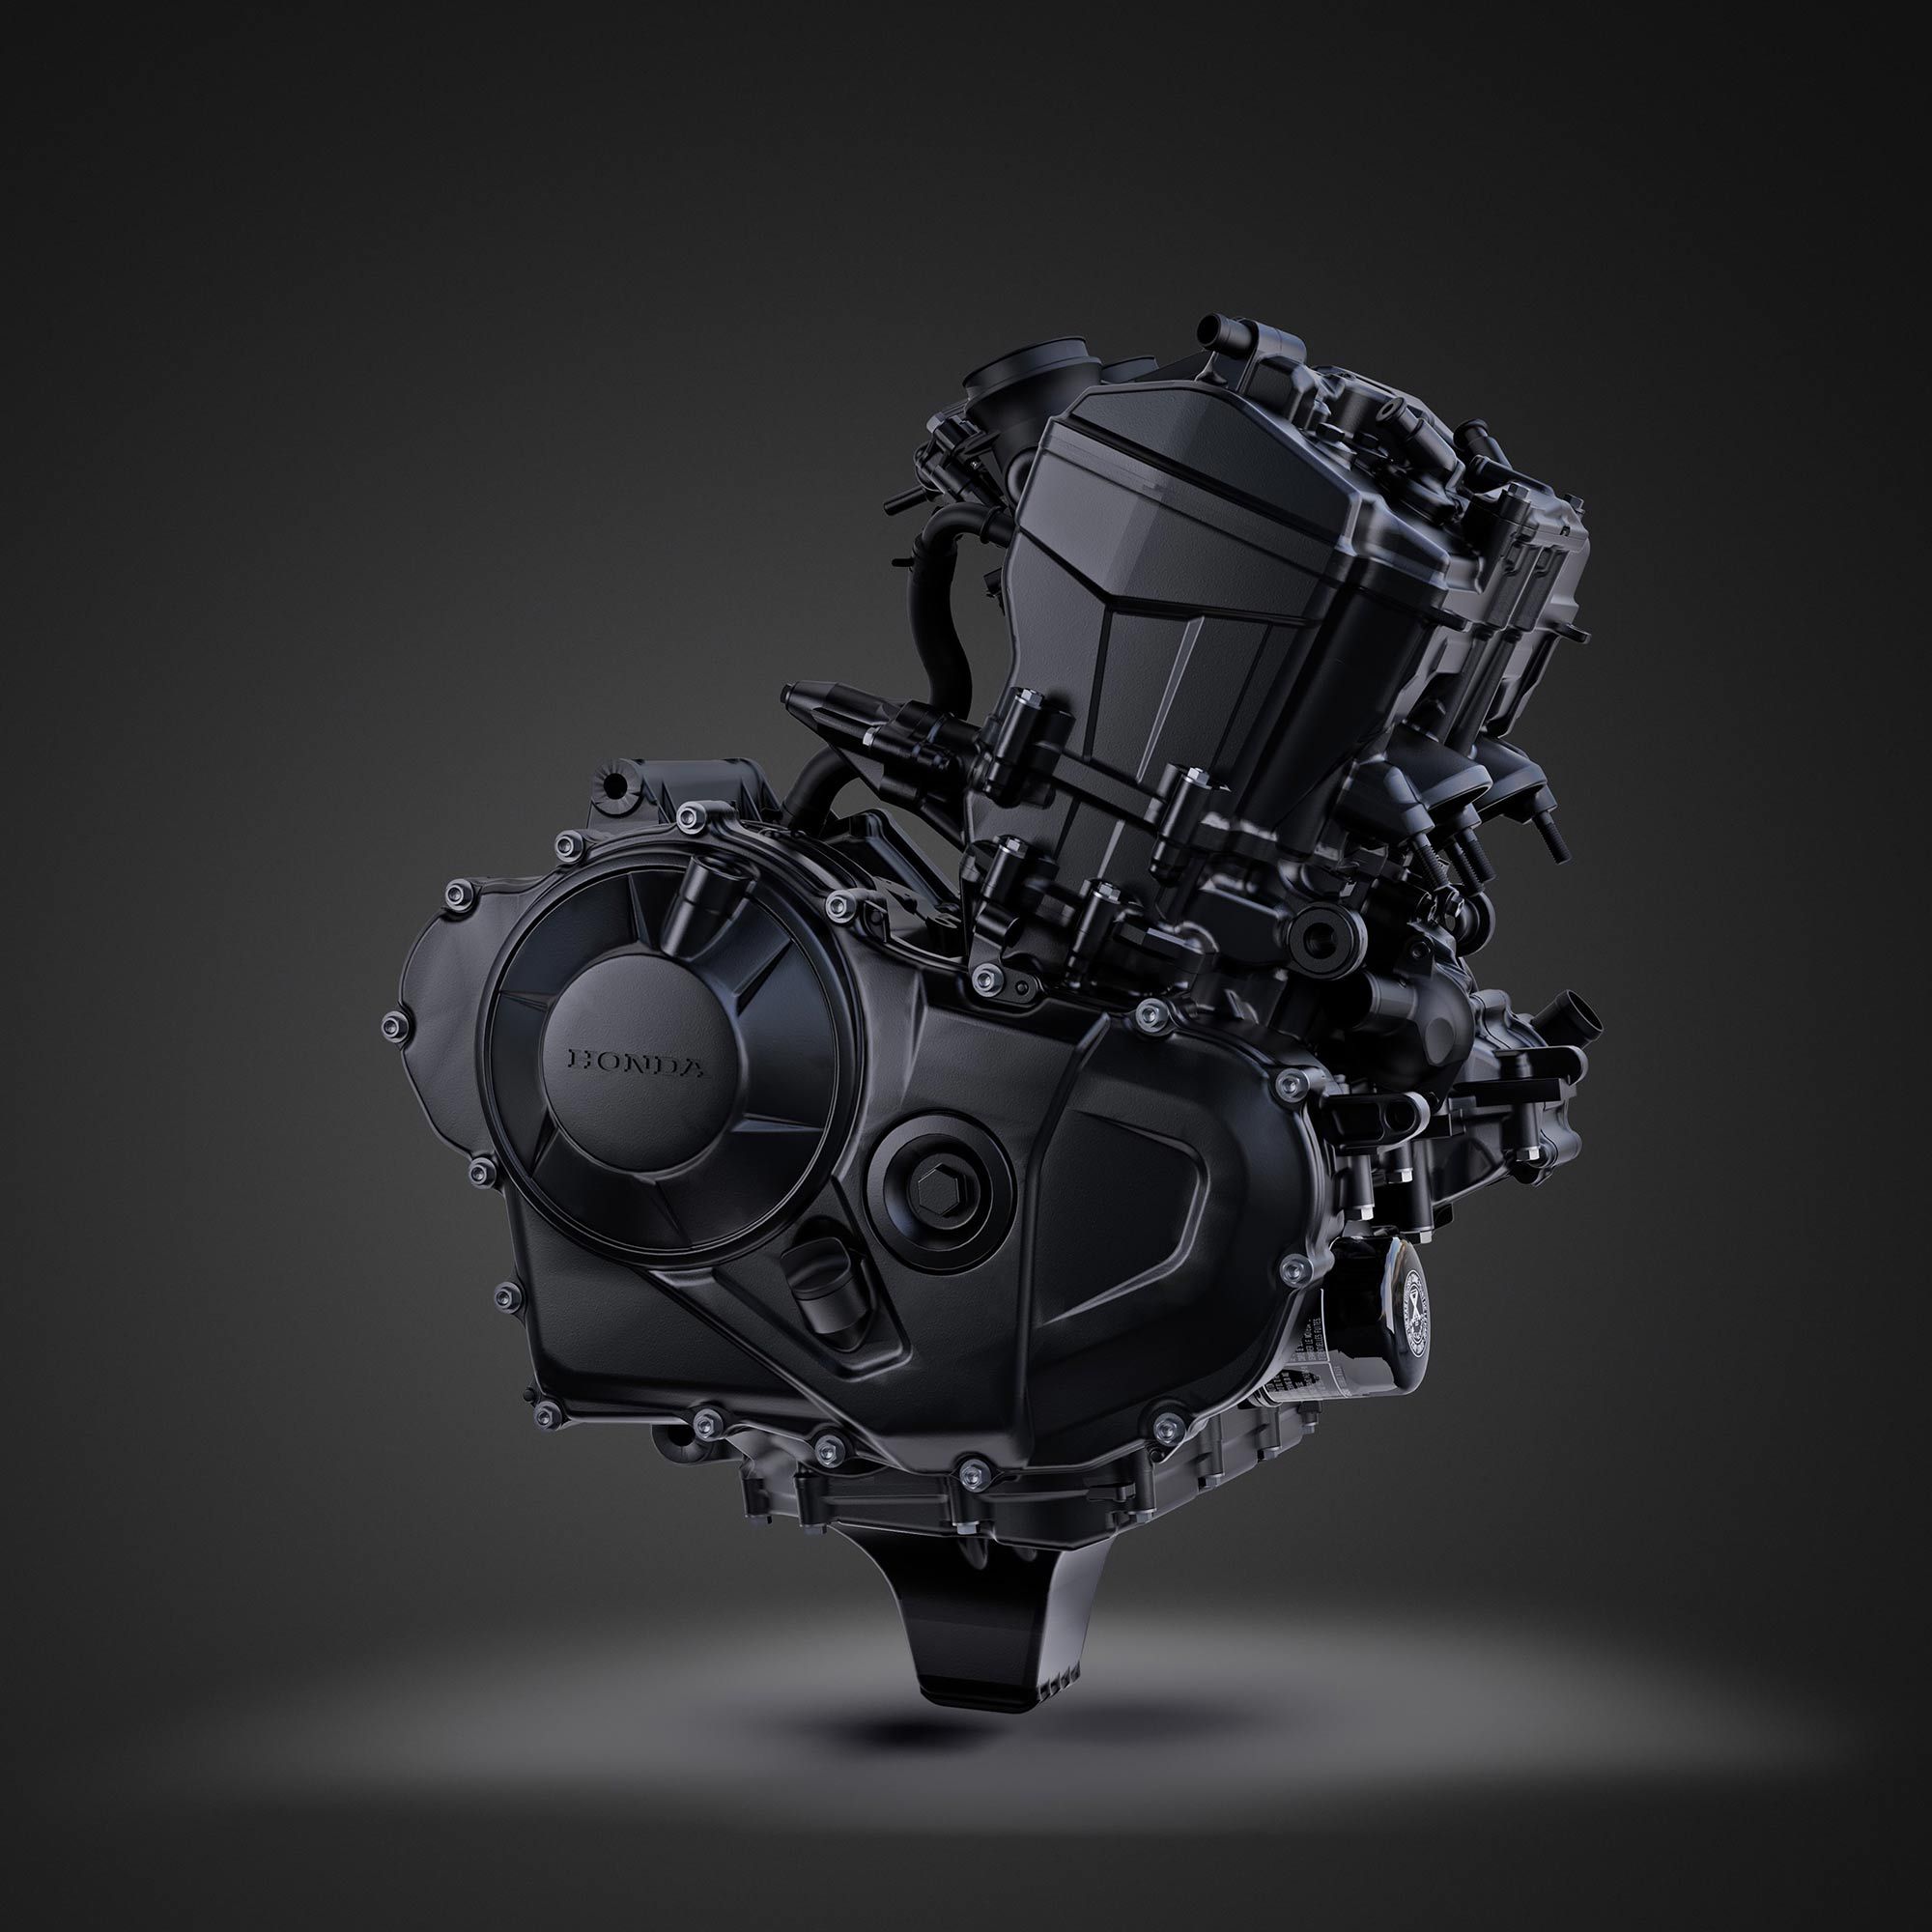 The eight-valve Unicam engine will feature a 270-degree crankshaft and be capable of producing a little over 90 hp at 9,500 rpm and 55 lb.-ft. of torque at 7,250 rpm.